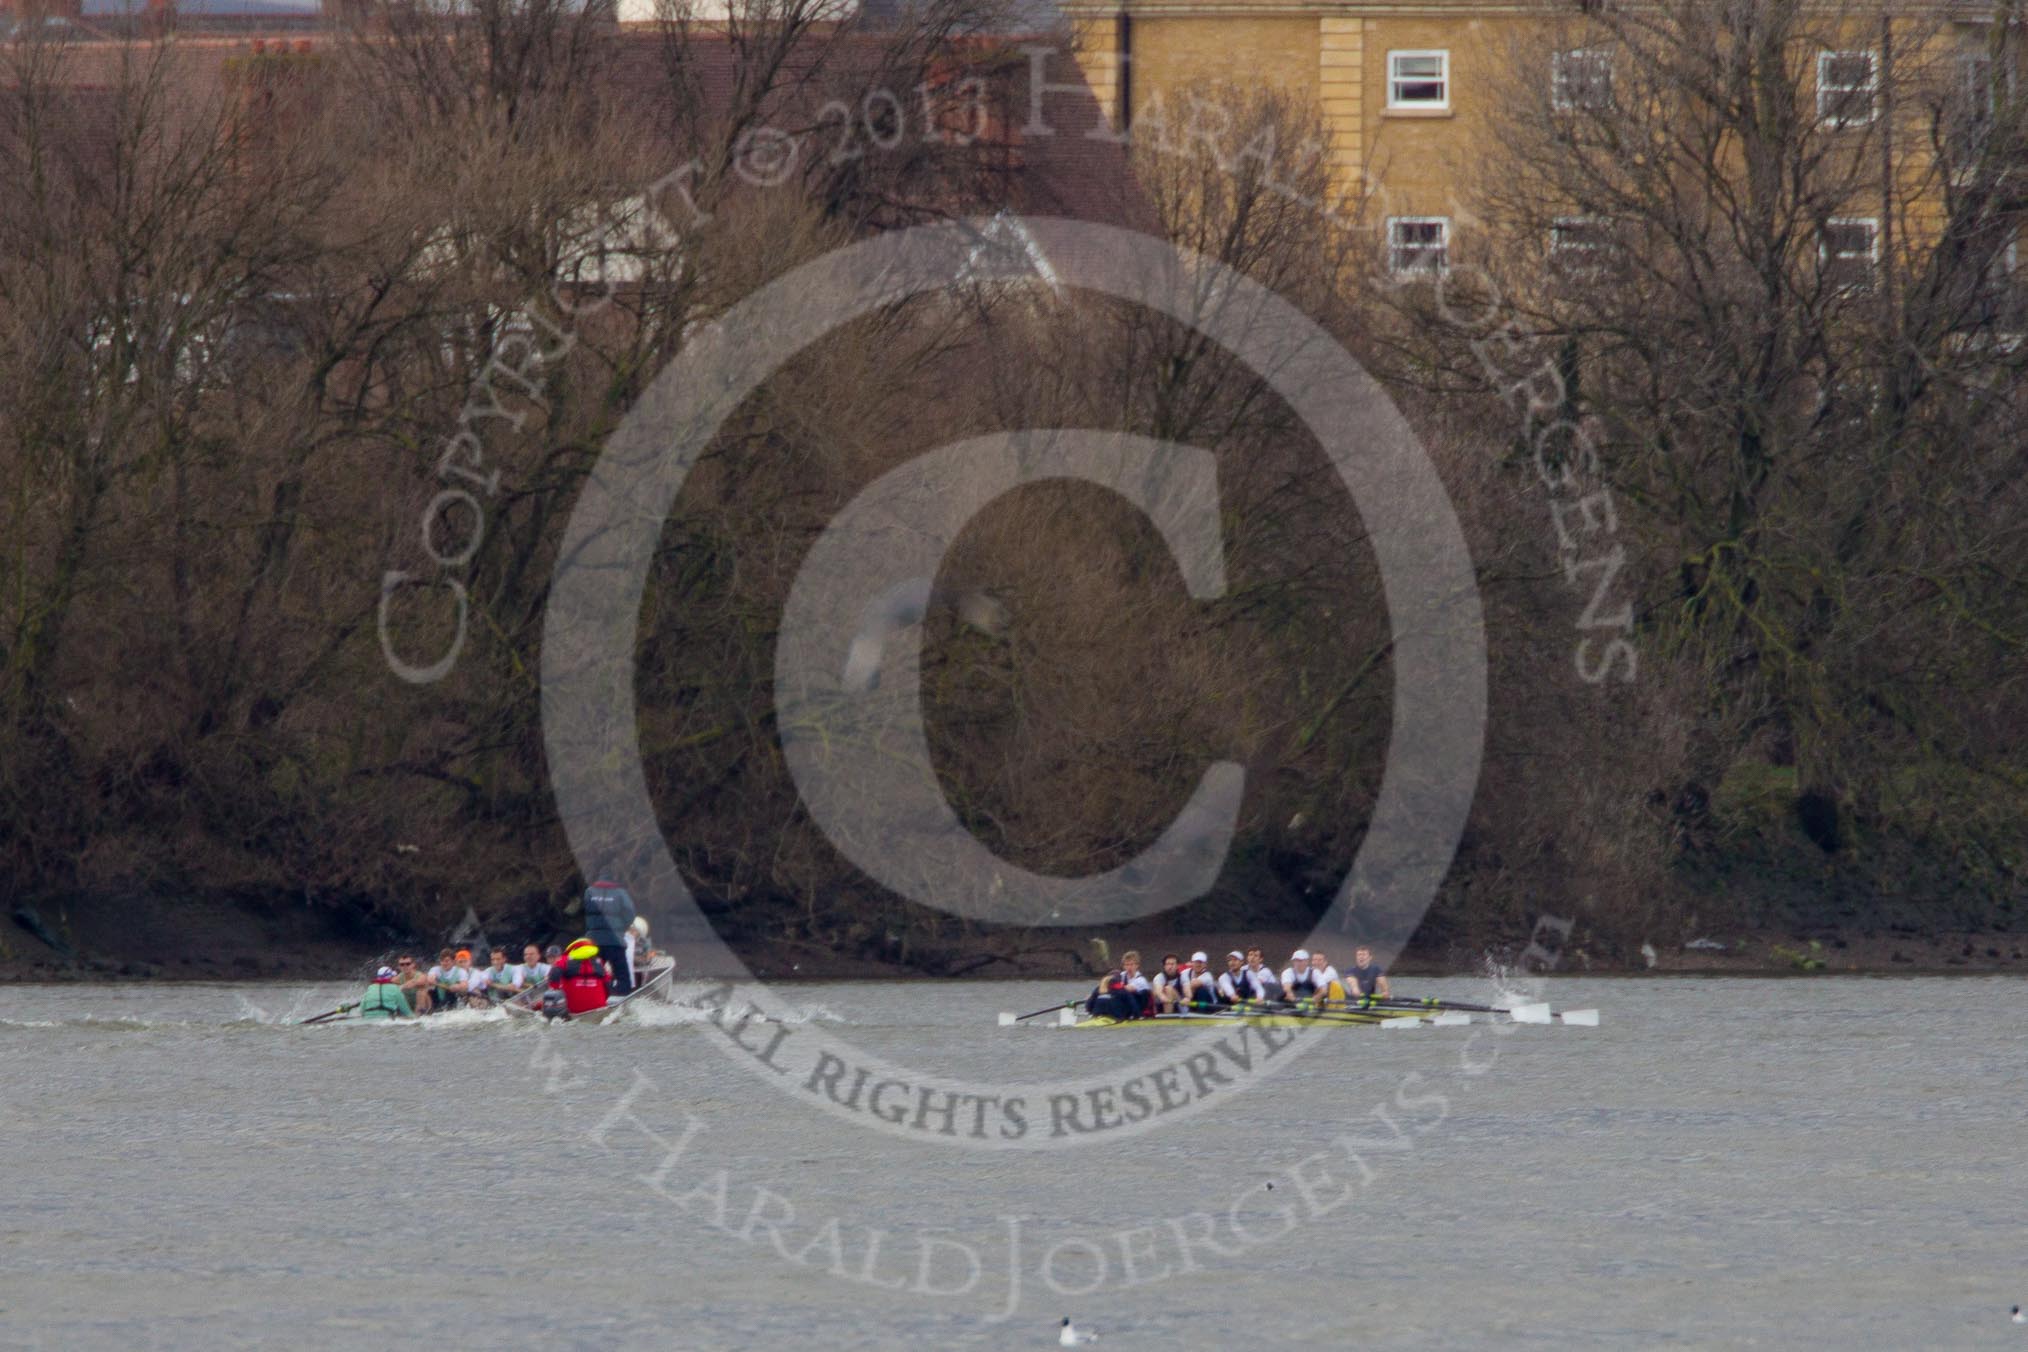 The Boat Race season 2013 - fixture CUBC vs Molesey BC, Goldie vs London RC.
Tideway,
London SW15,

United Kingdom,
on 16 March 2013 at 15:13, image #71